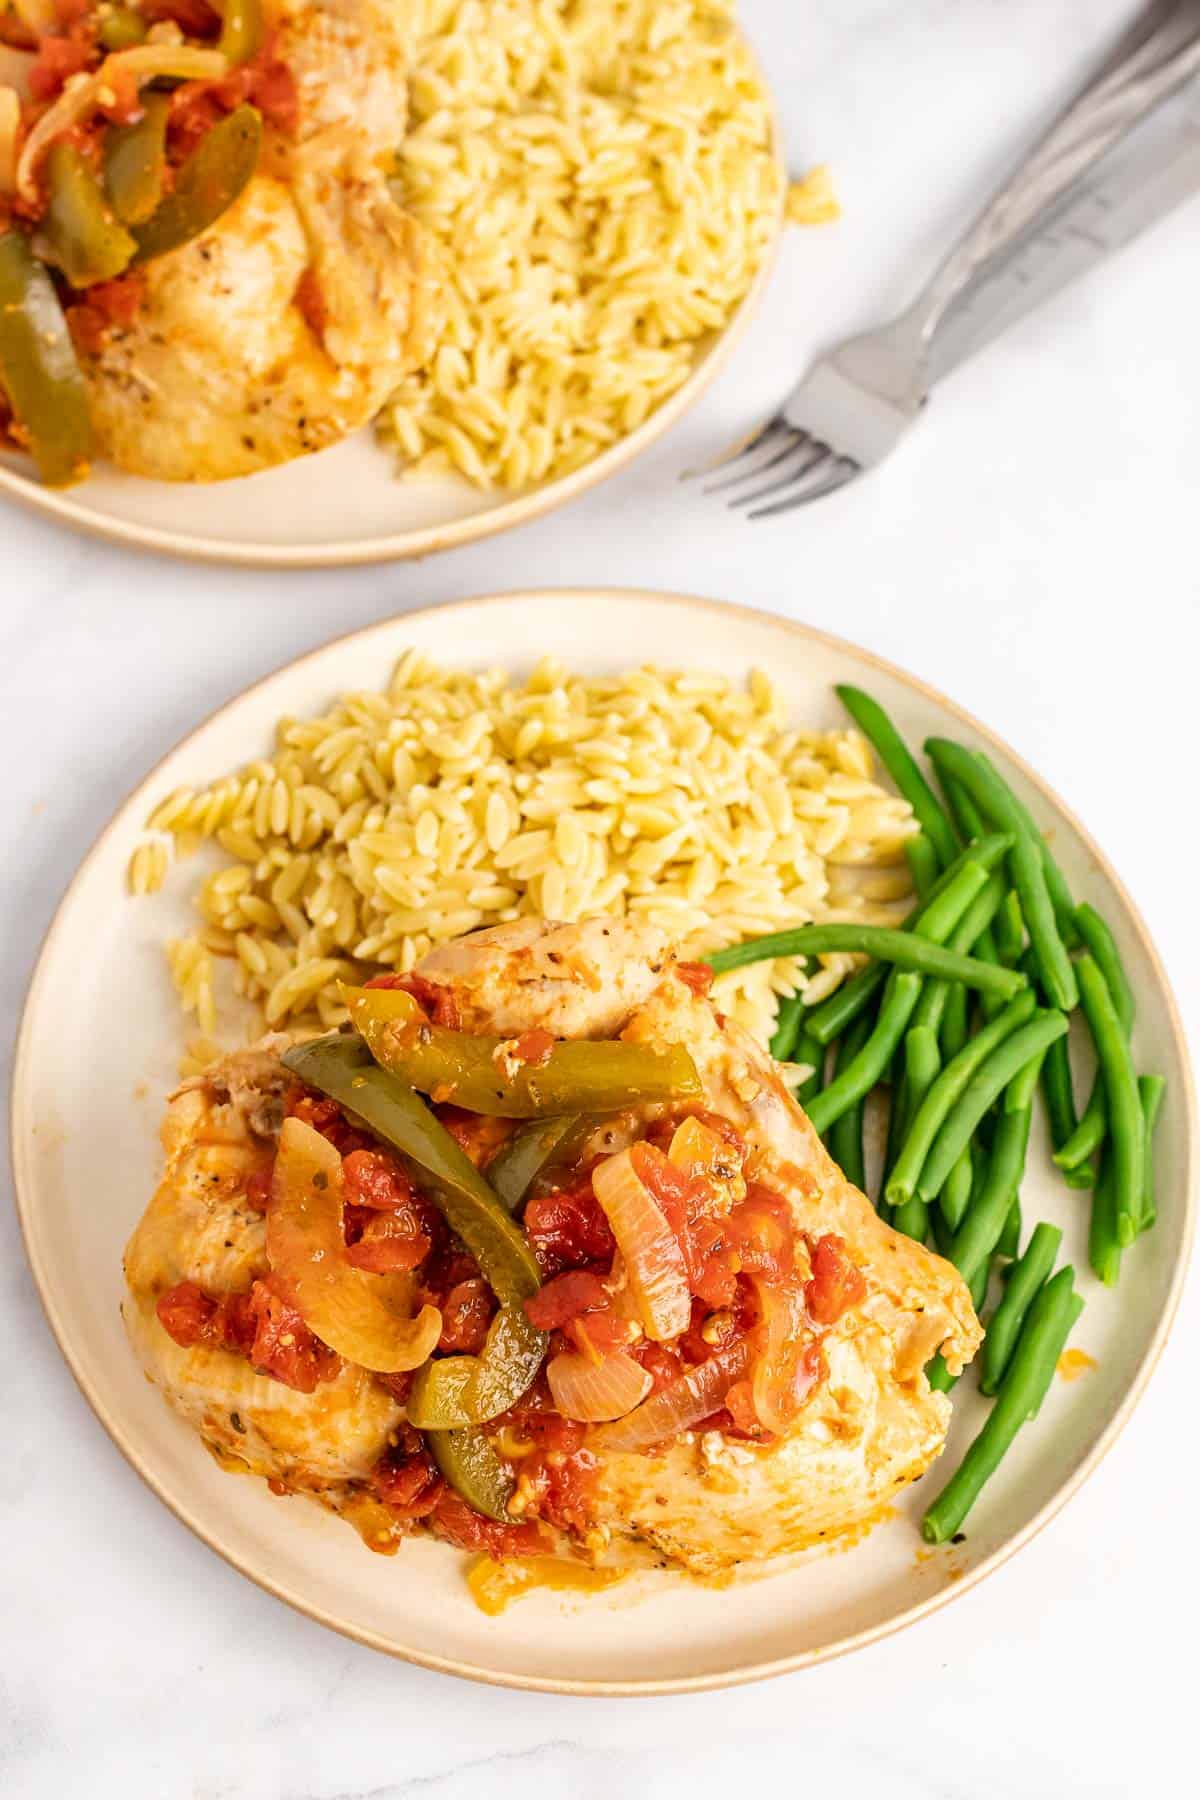 Plate of Chicken Cacciatore with orzo and green beans